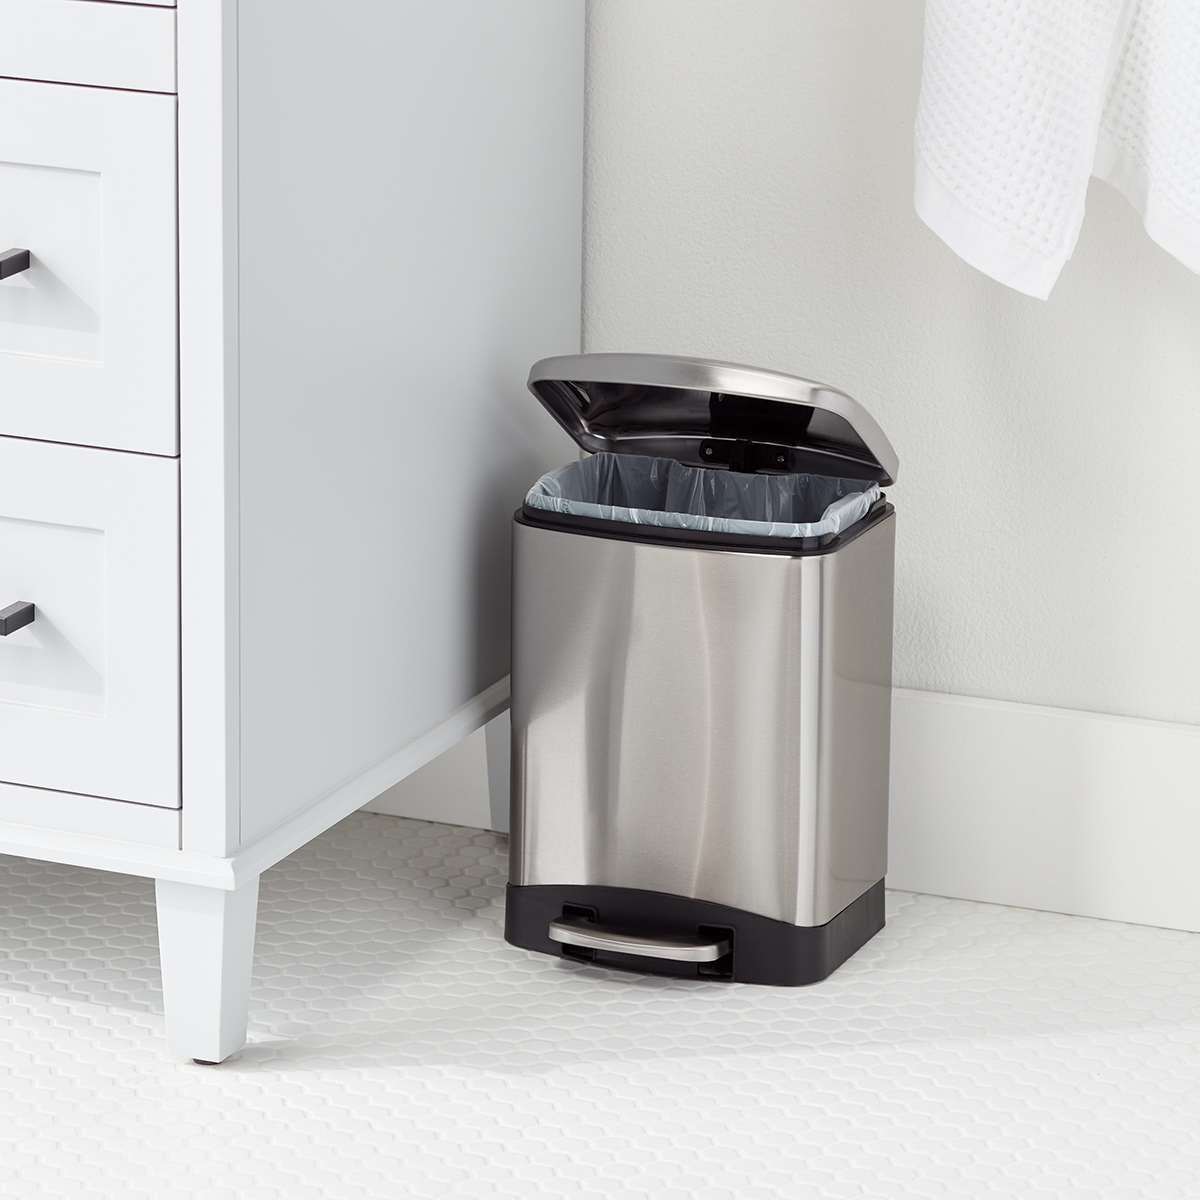 The Container Store 15.8 gal./60L Dual Recycler Step Trash Can